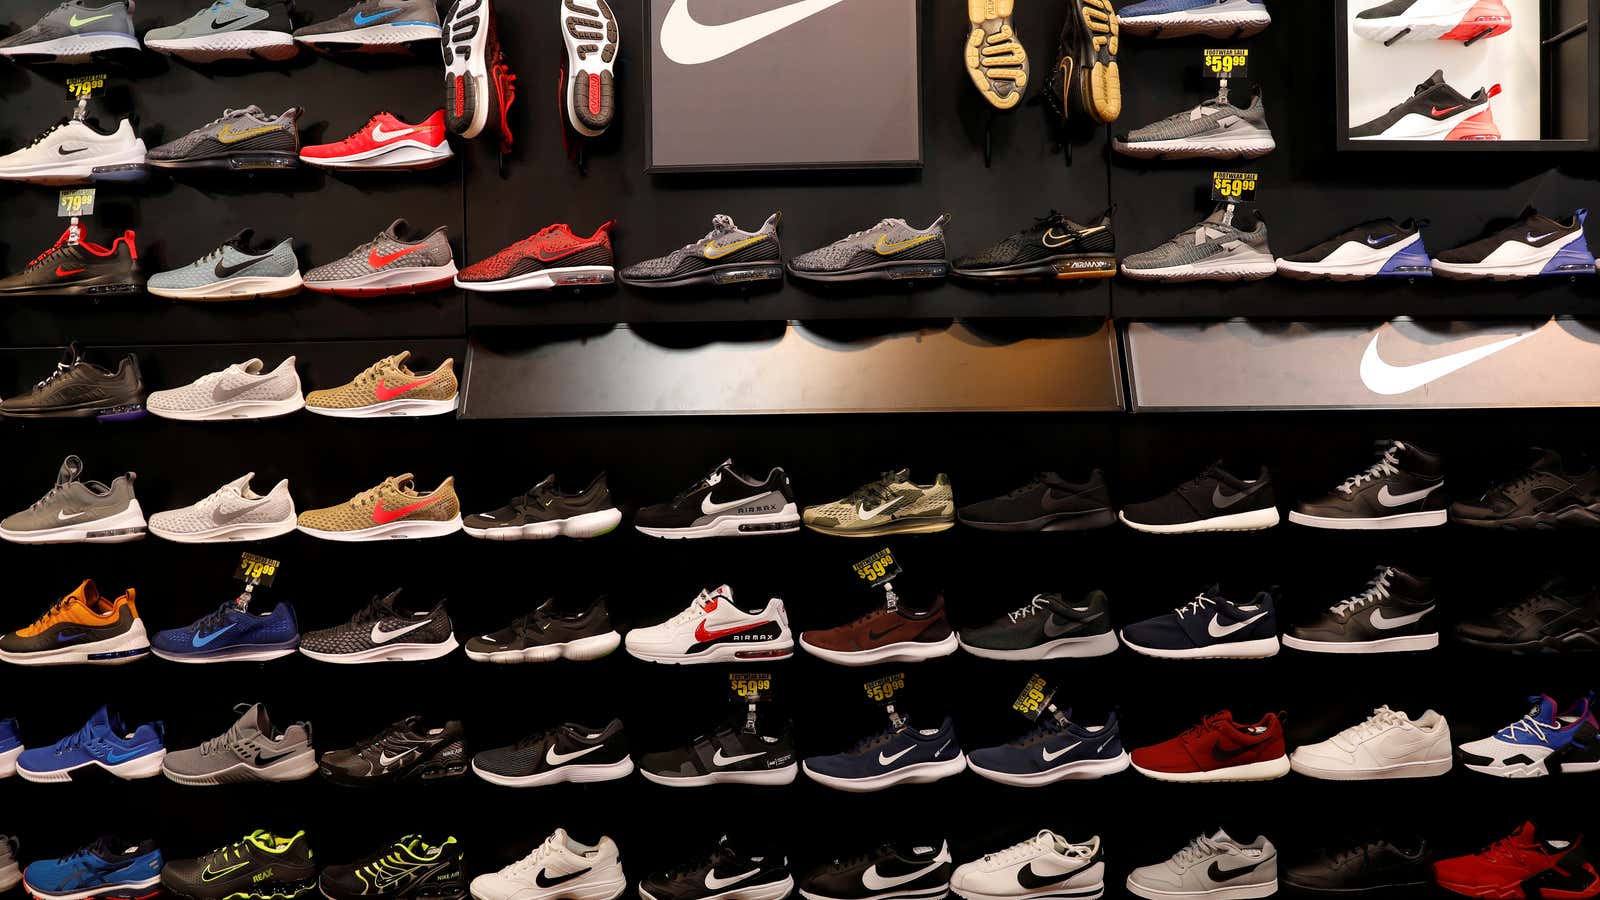 Nikes will be harder to come by through at least next summer, according to the company.